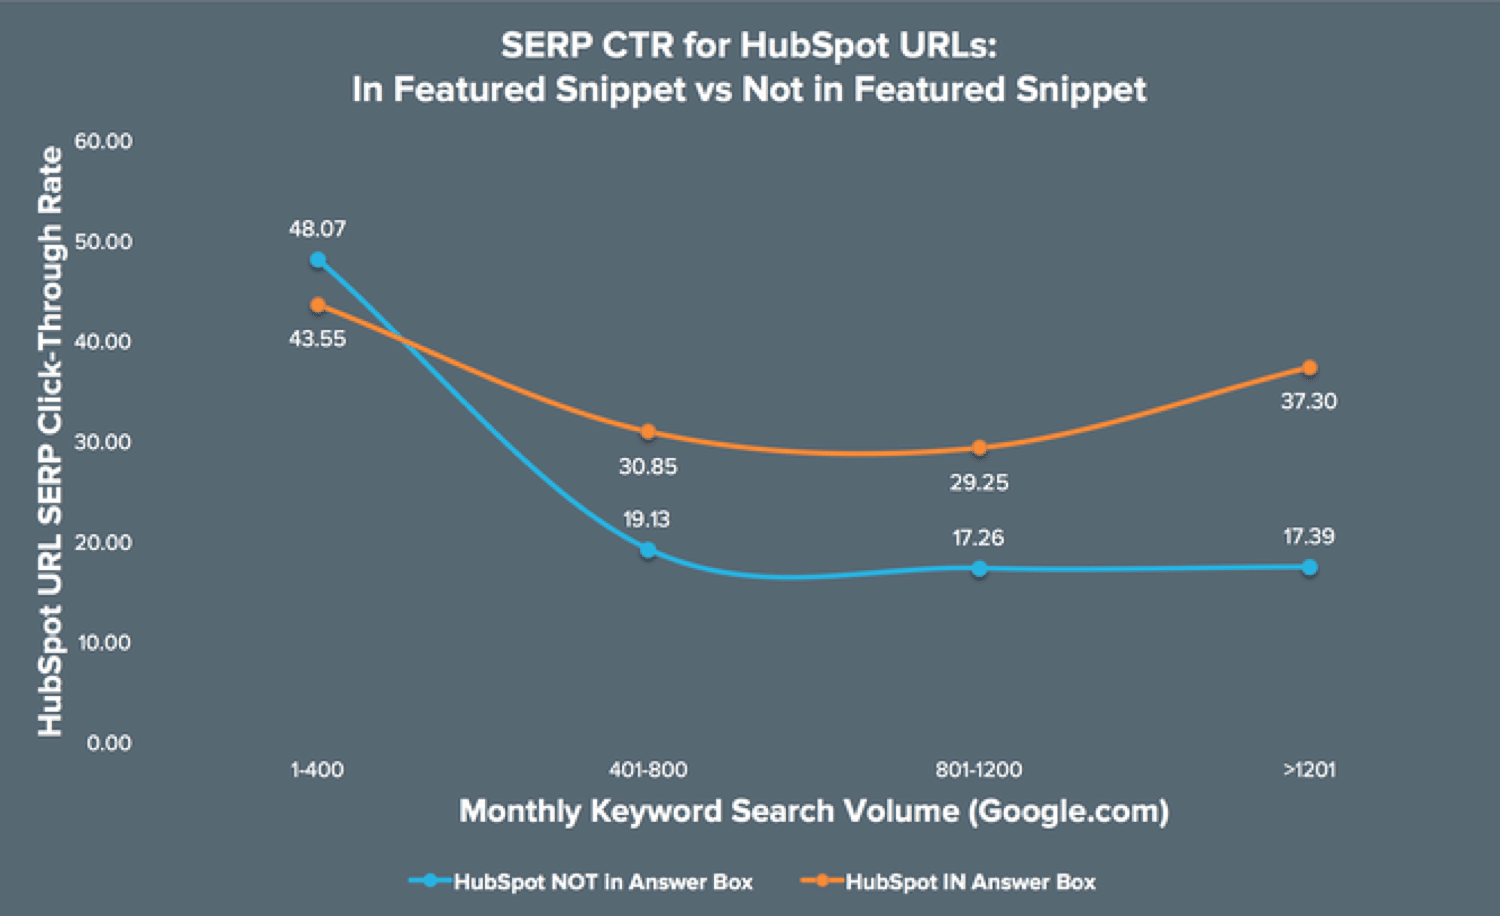 Increasing CTR (click-through-rate) for ranking in the featured snippet is worth your time